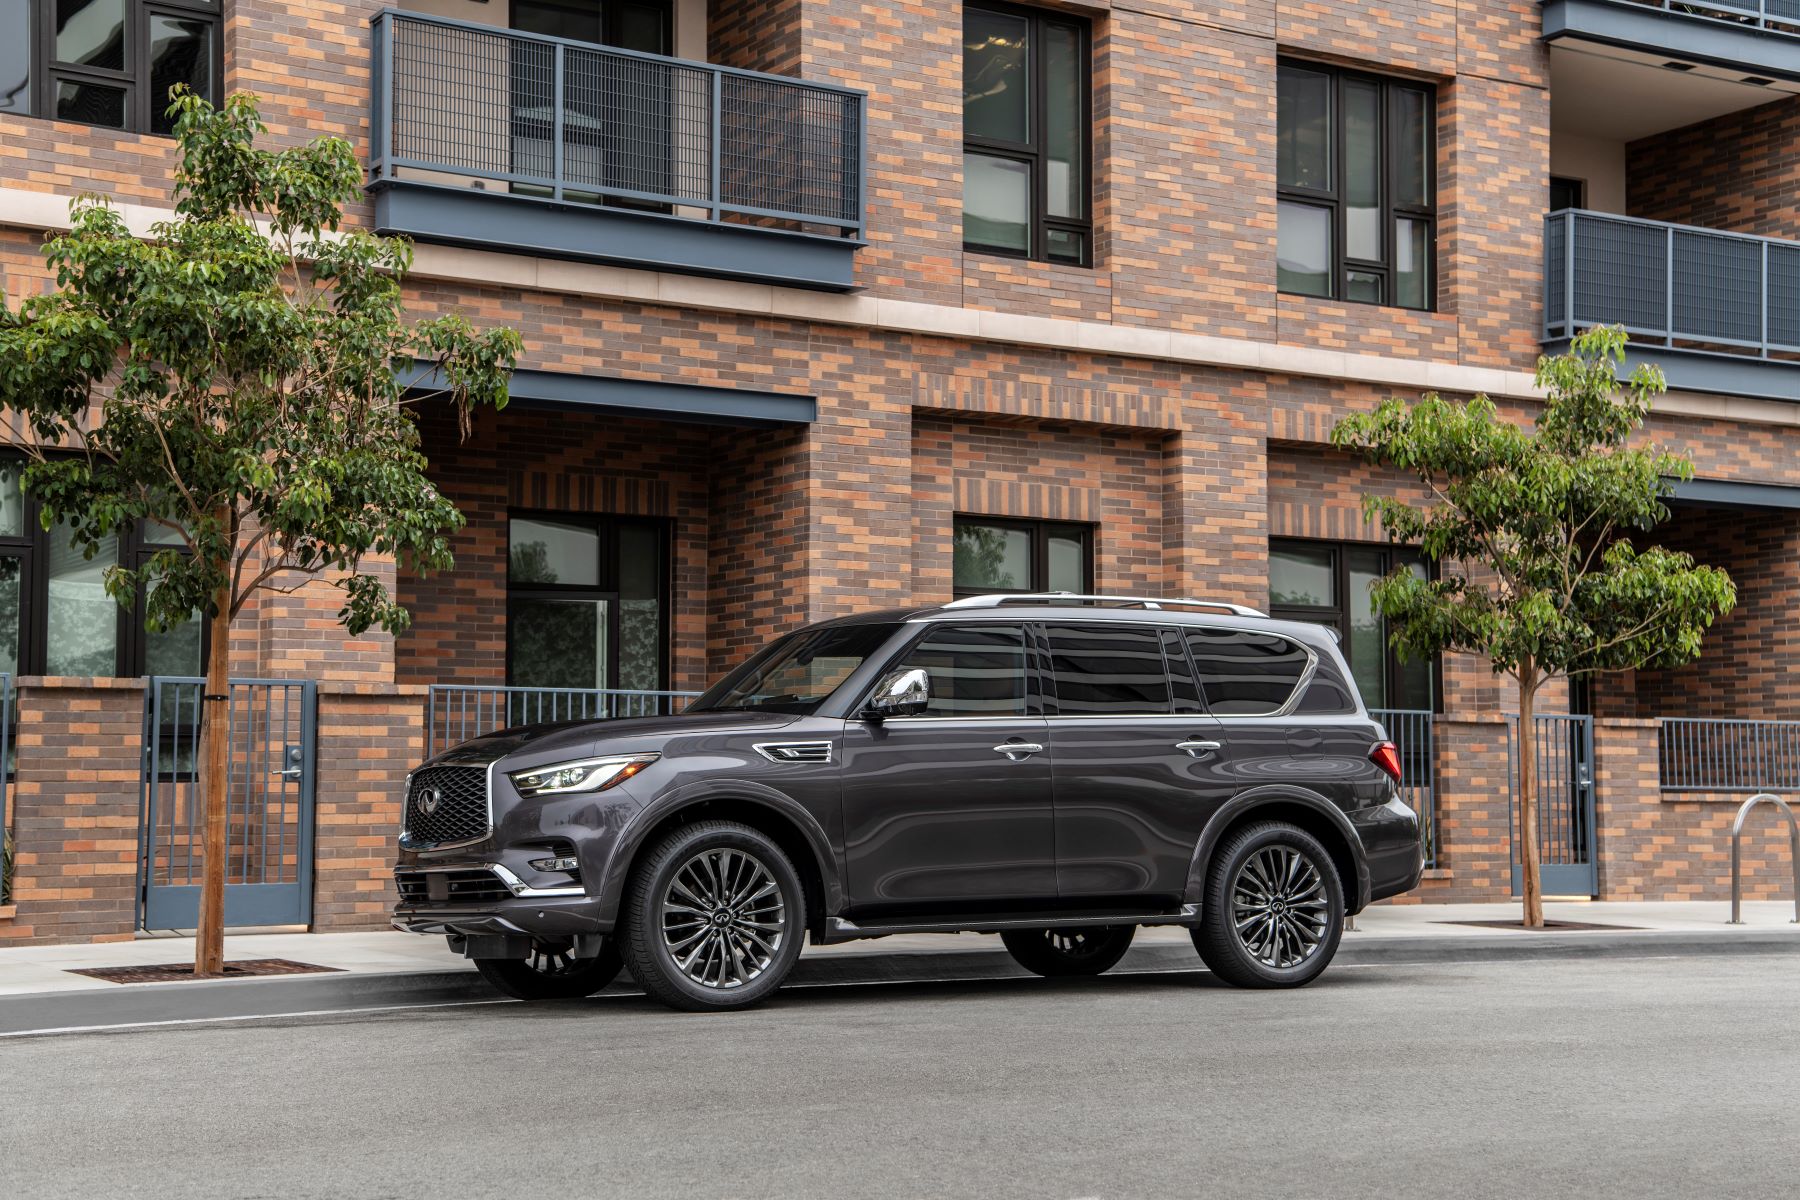 A dark gray 2023 Infiniti QX80 full-size luxury SUV model parked outside a brick apartment building